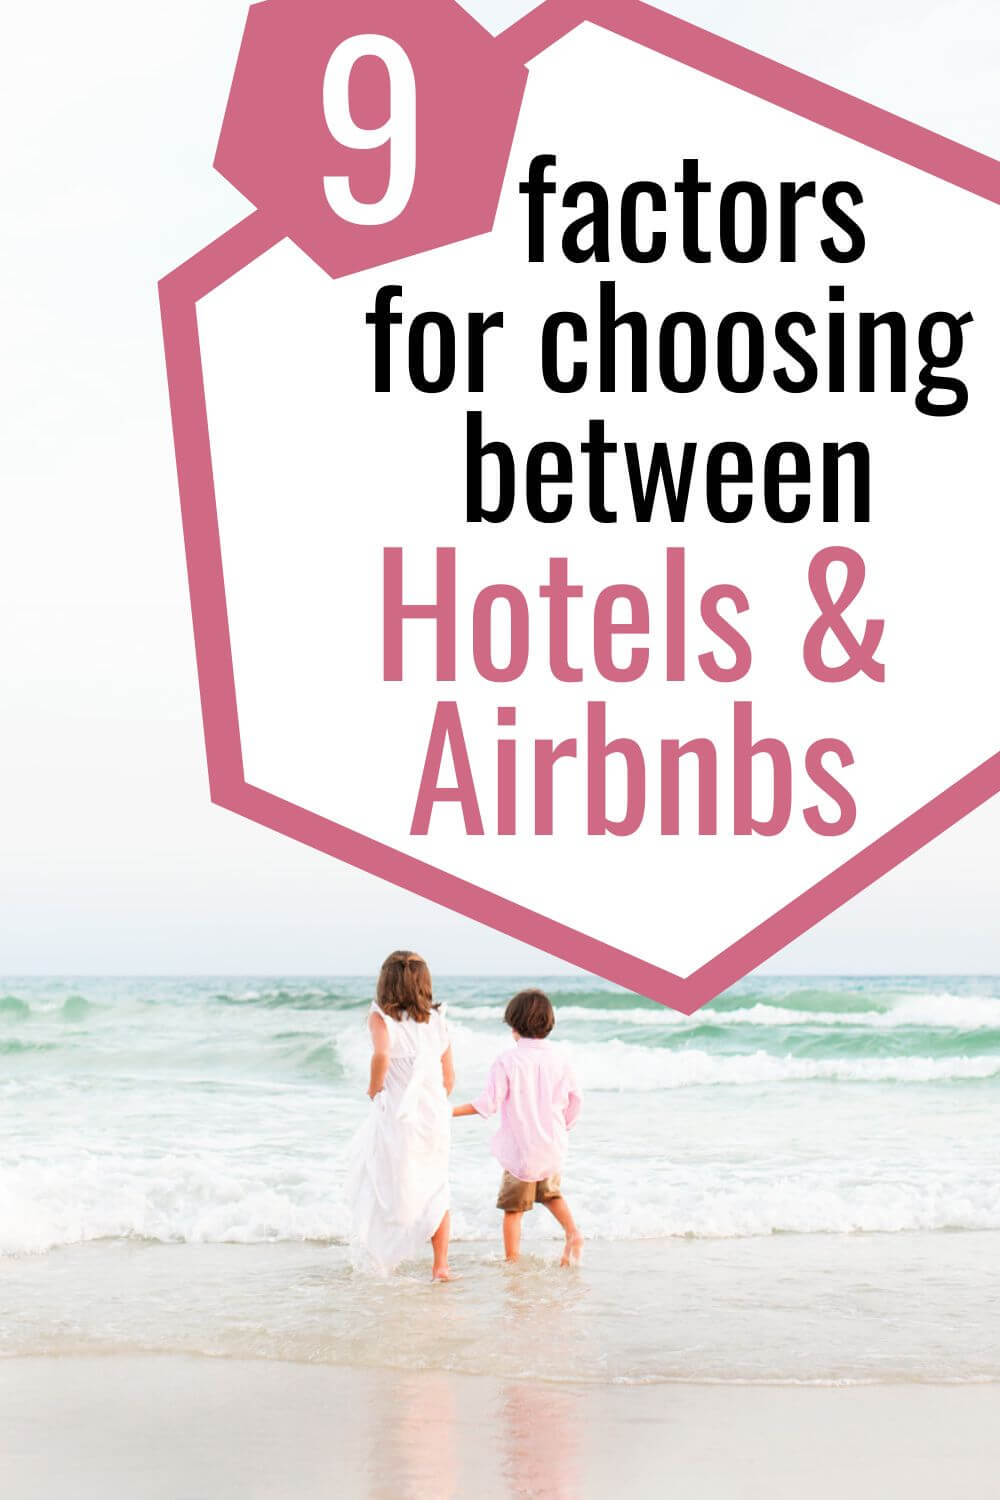 Hotels or Airbnbs